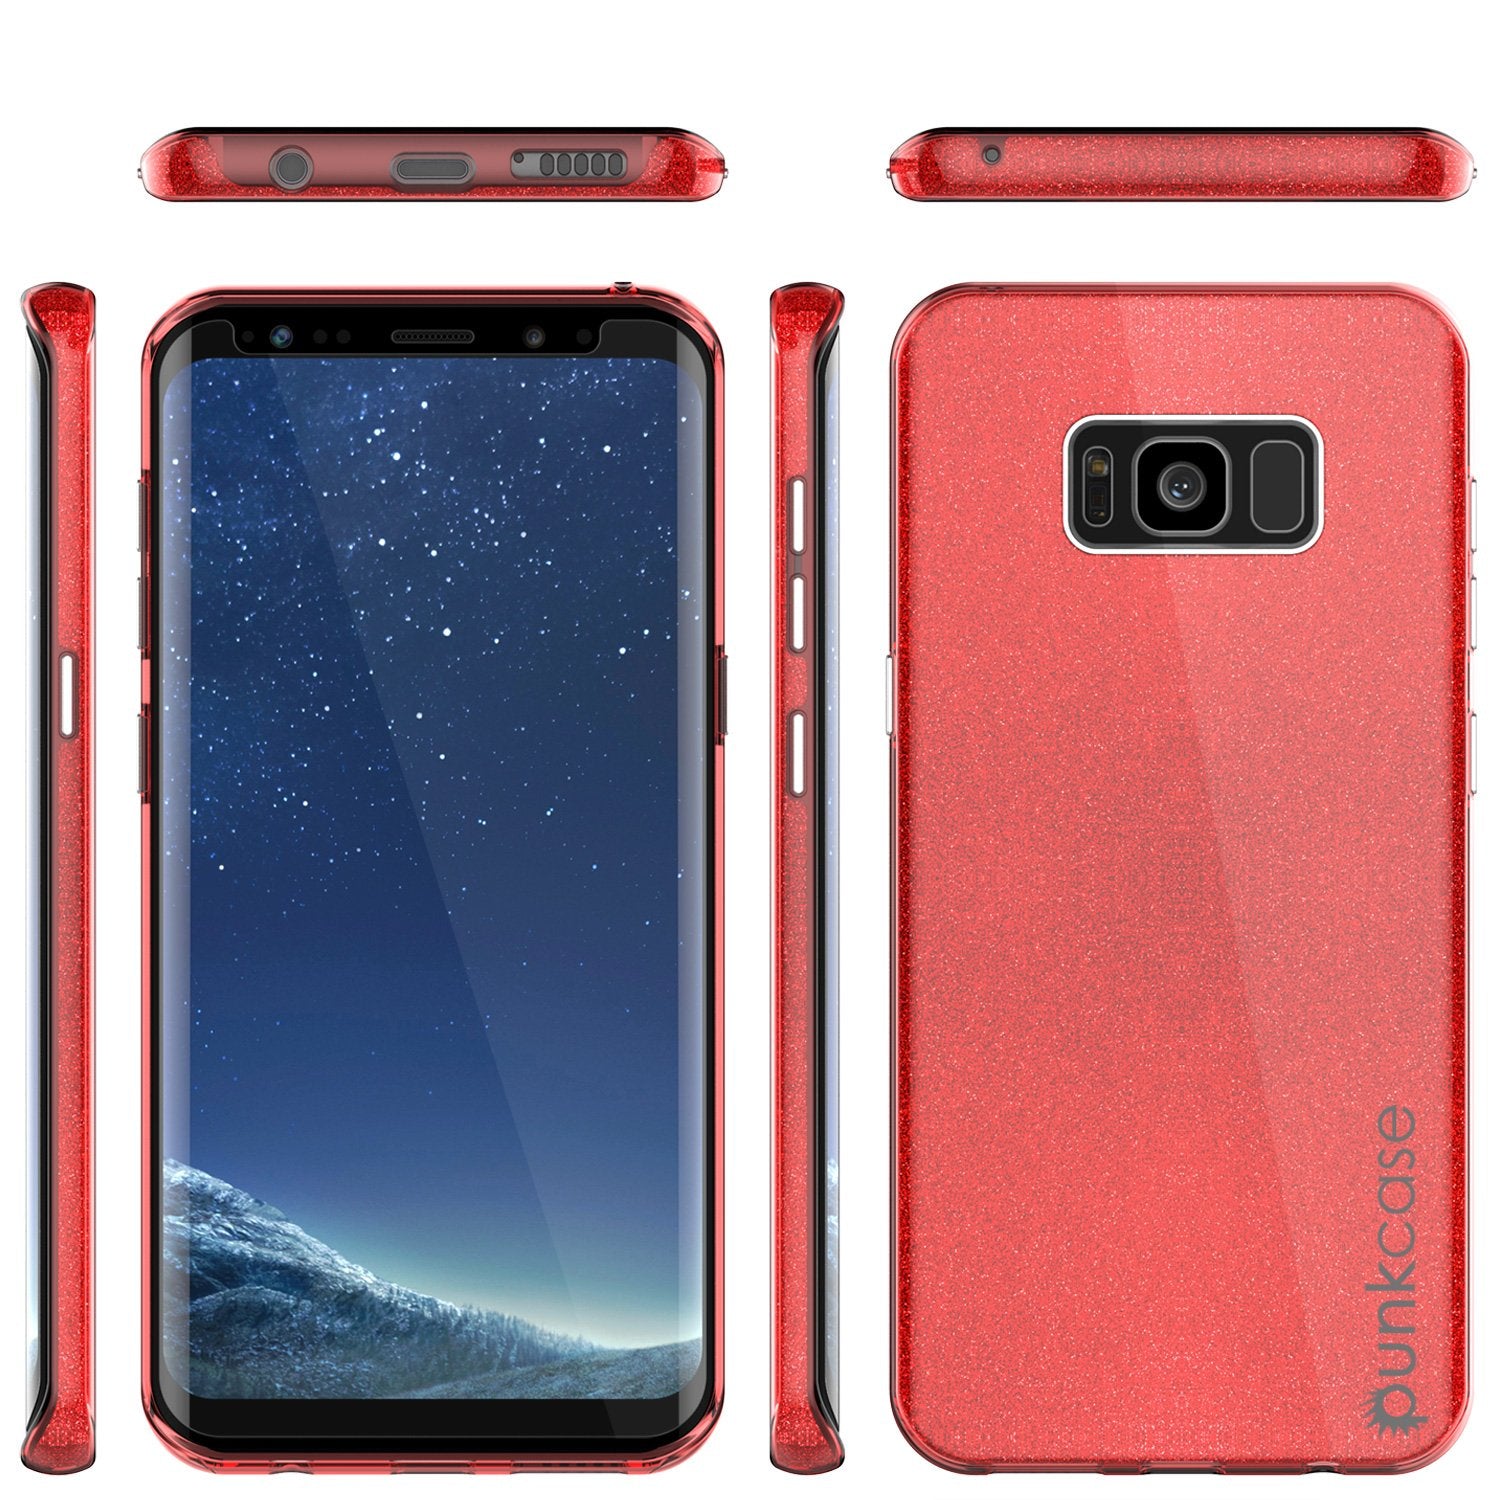 Galaxy S8 Plus Case, Punkcase Galactic 2.0 Series Ultra Slim Protective Armor TPU Cover [Red] - PunkCase NZ